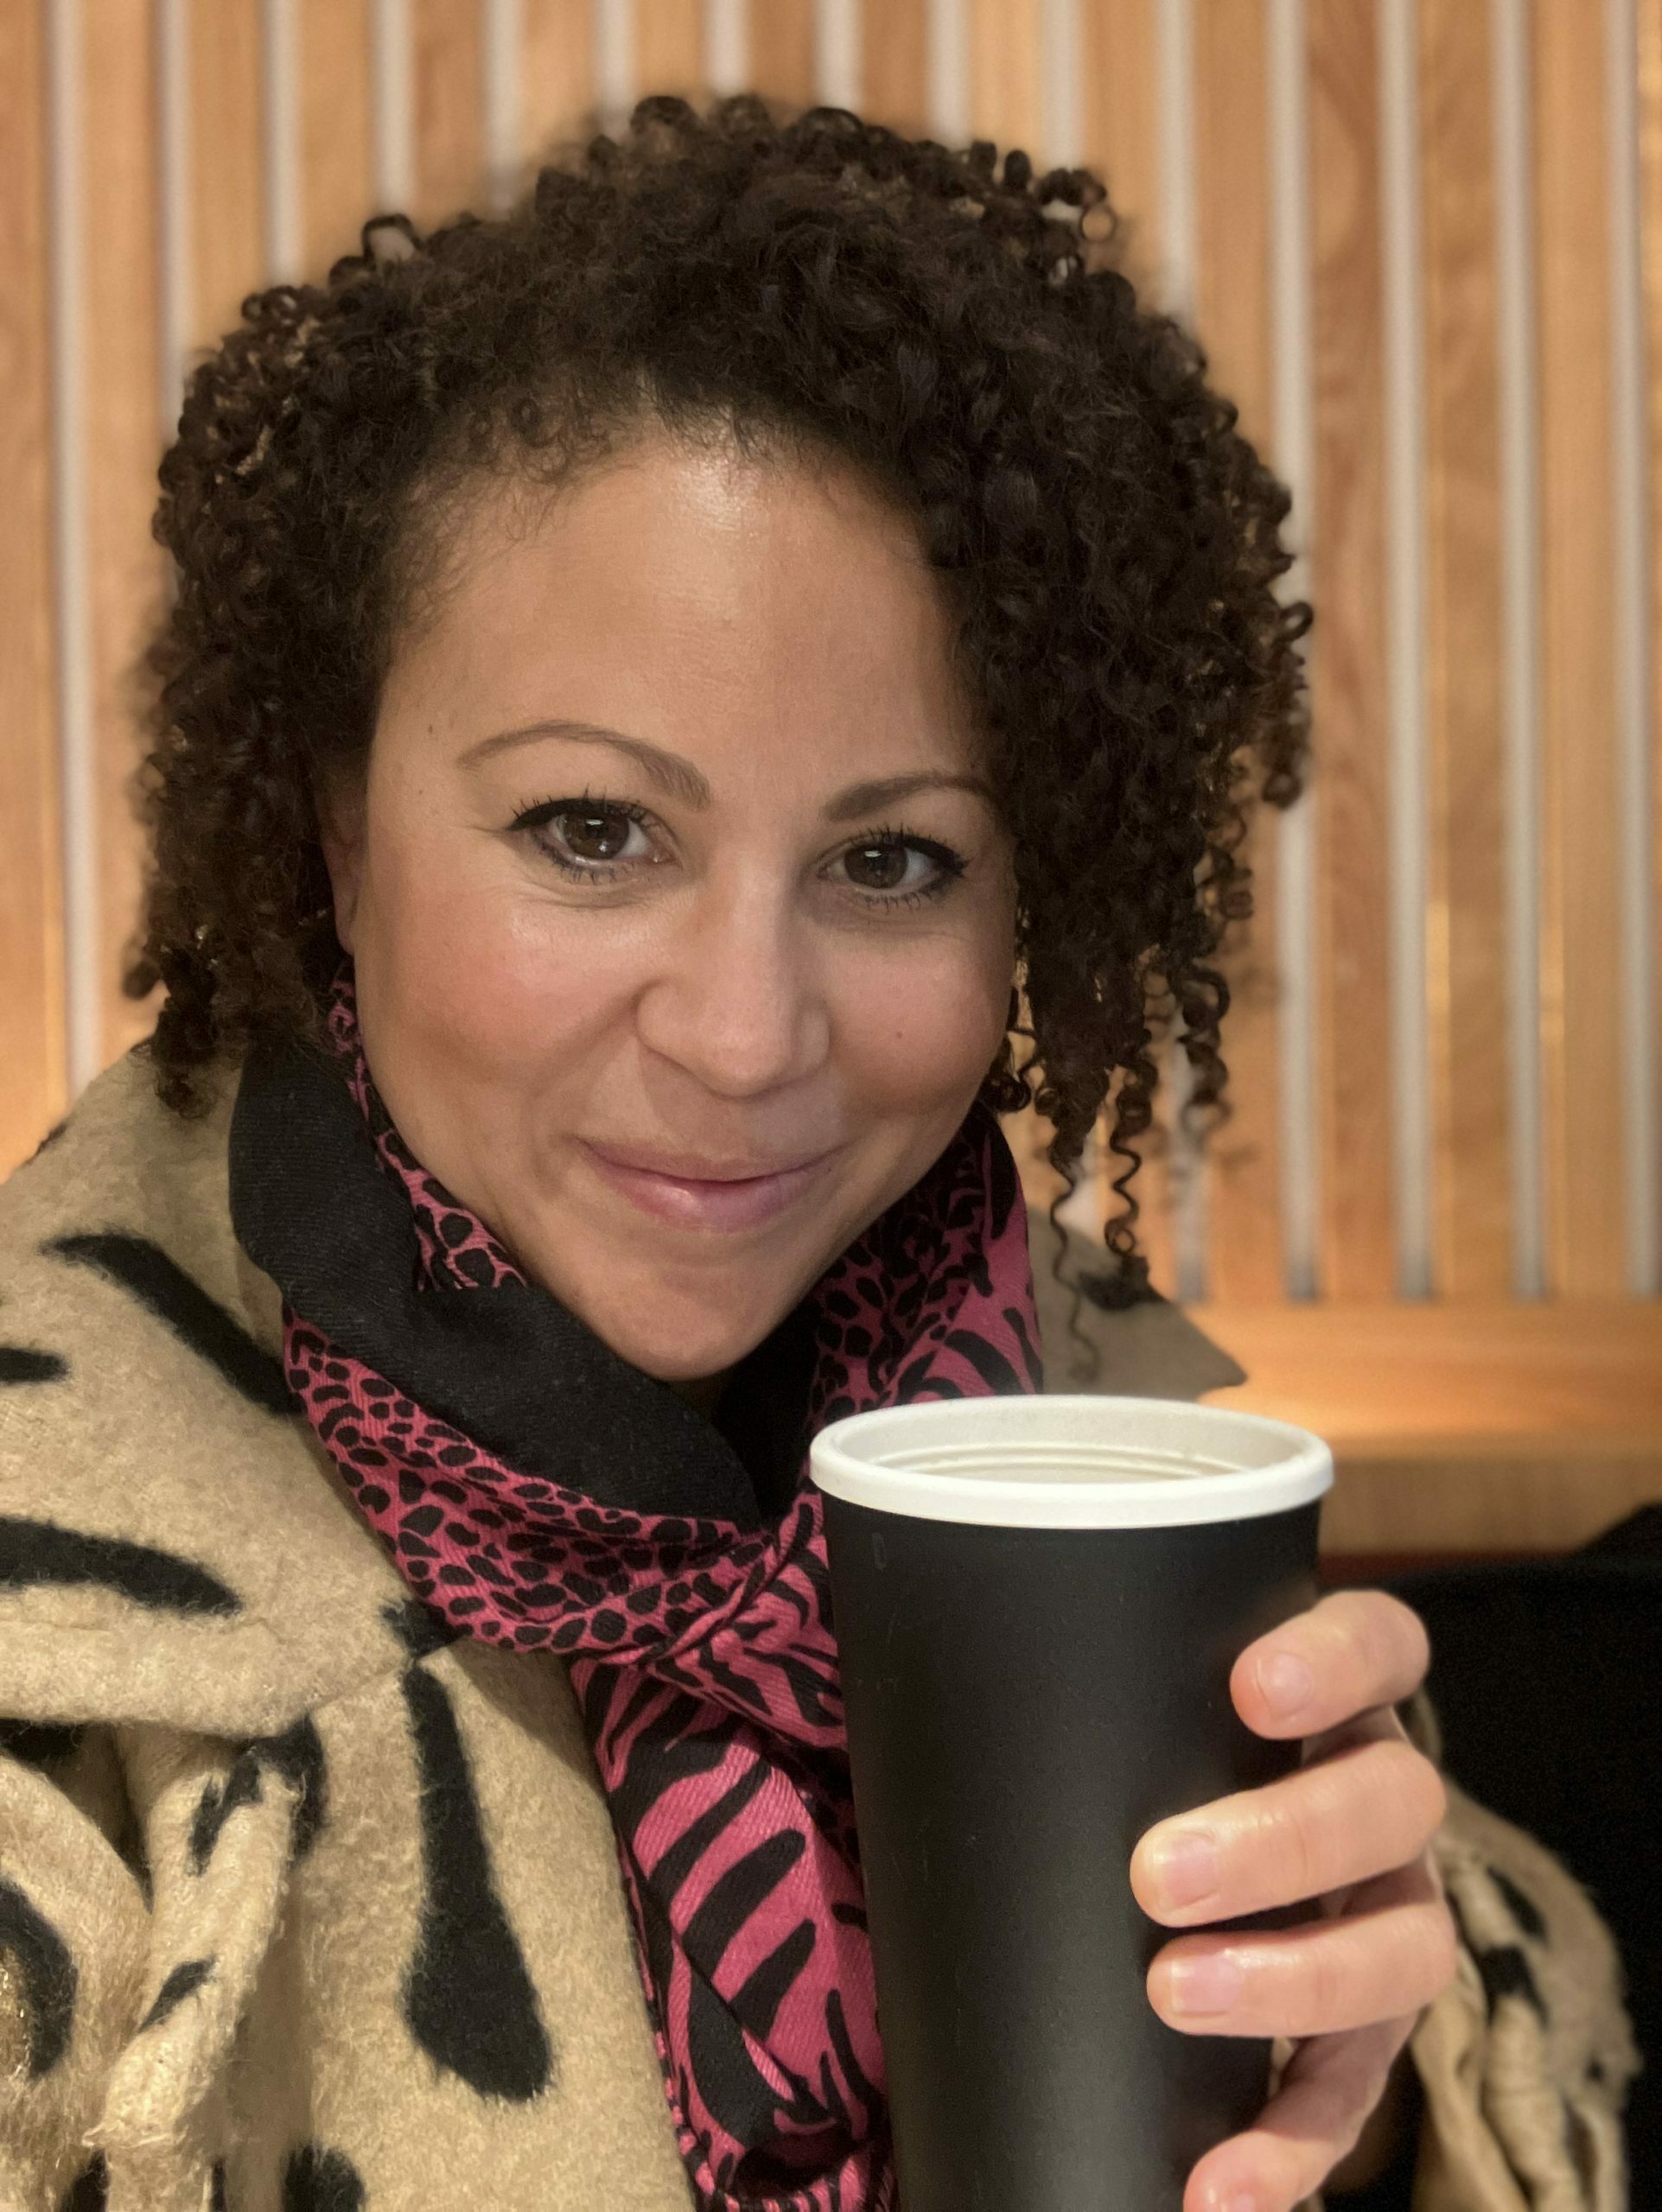 Charlotte from Brownie and the Bean smiling and holding a reusable cup. She was waiting in London to enter the Rose Review progress report event.